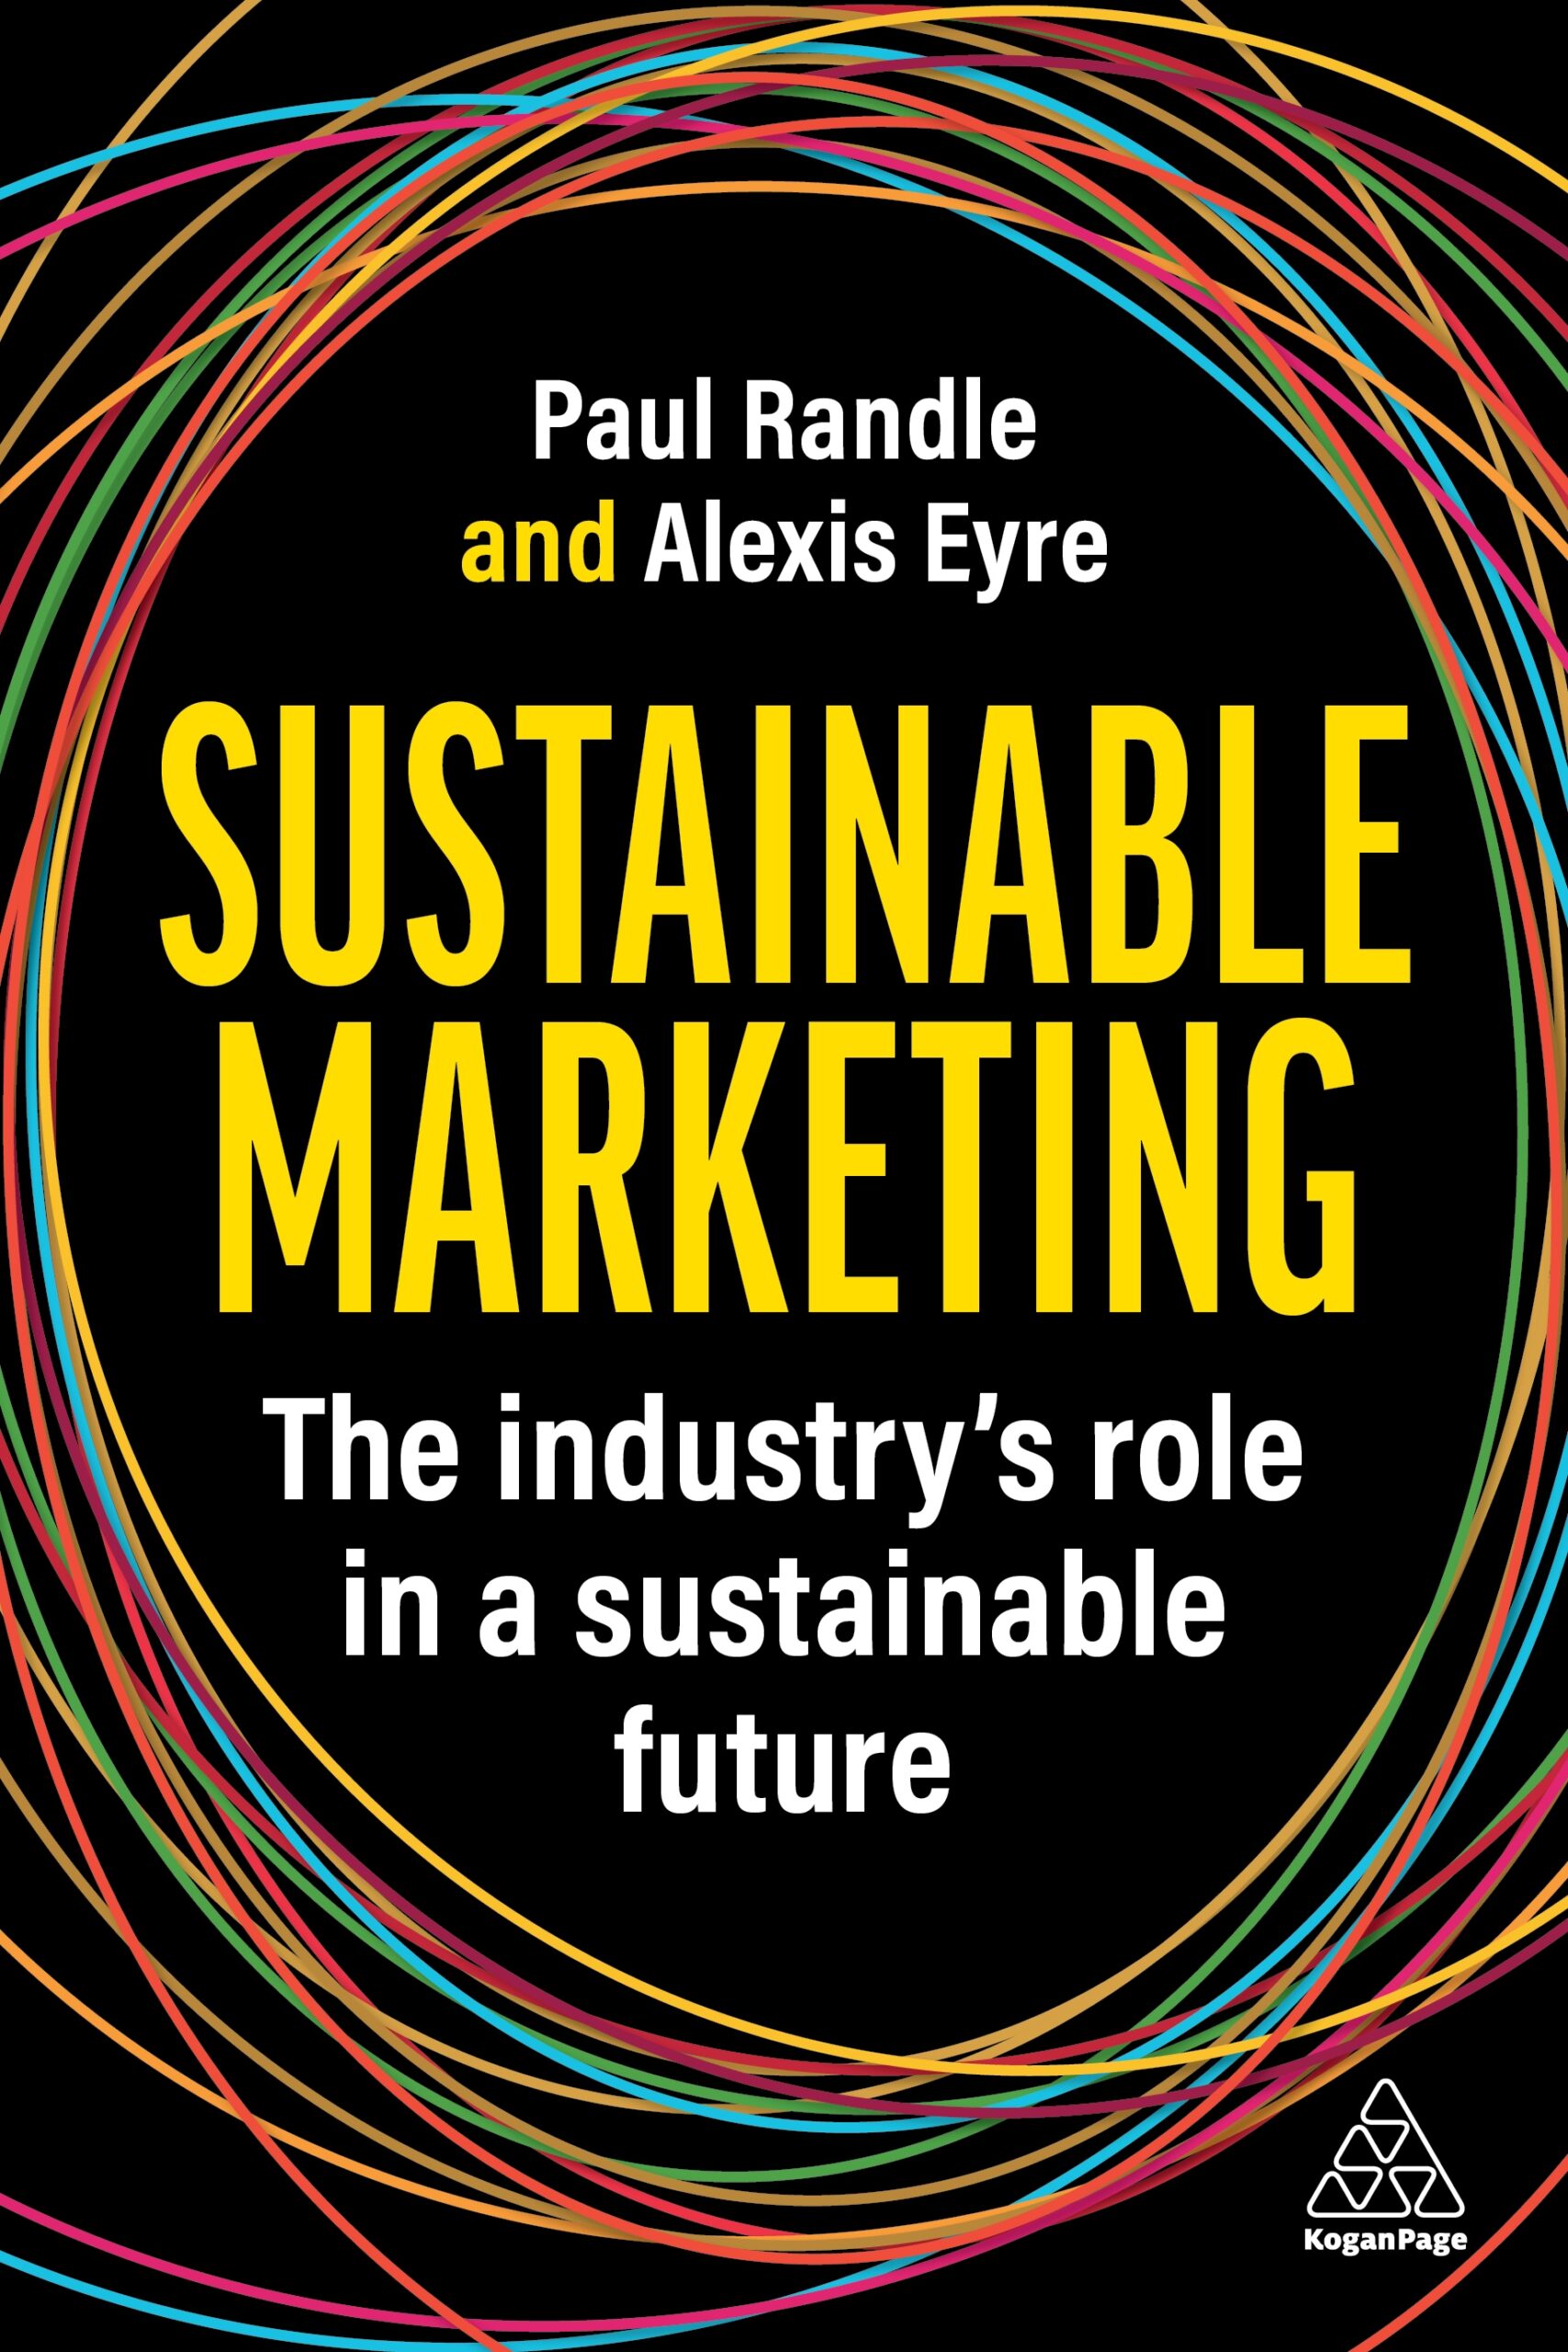 Sustainable Marketing by Paul Randle and Alexis Eyre